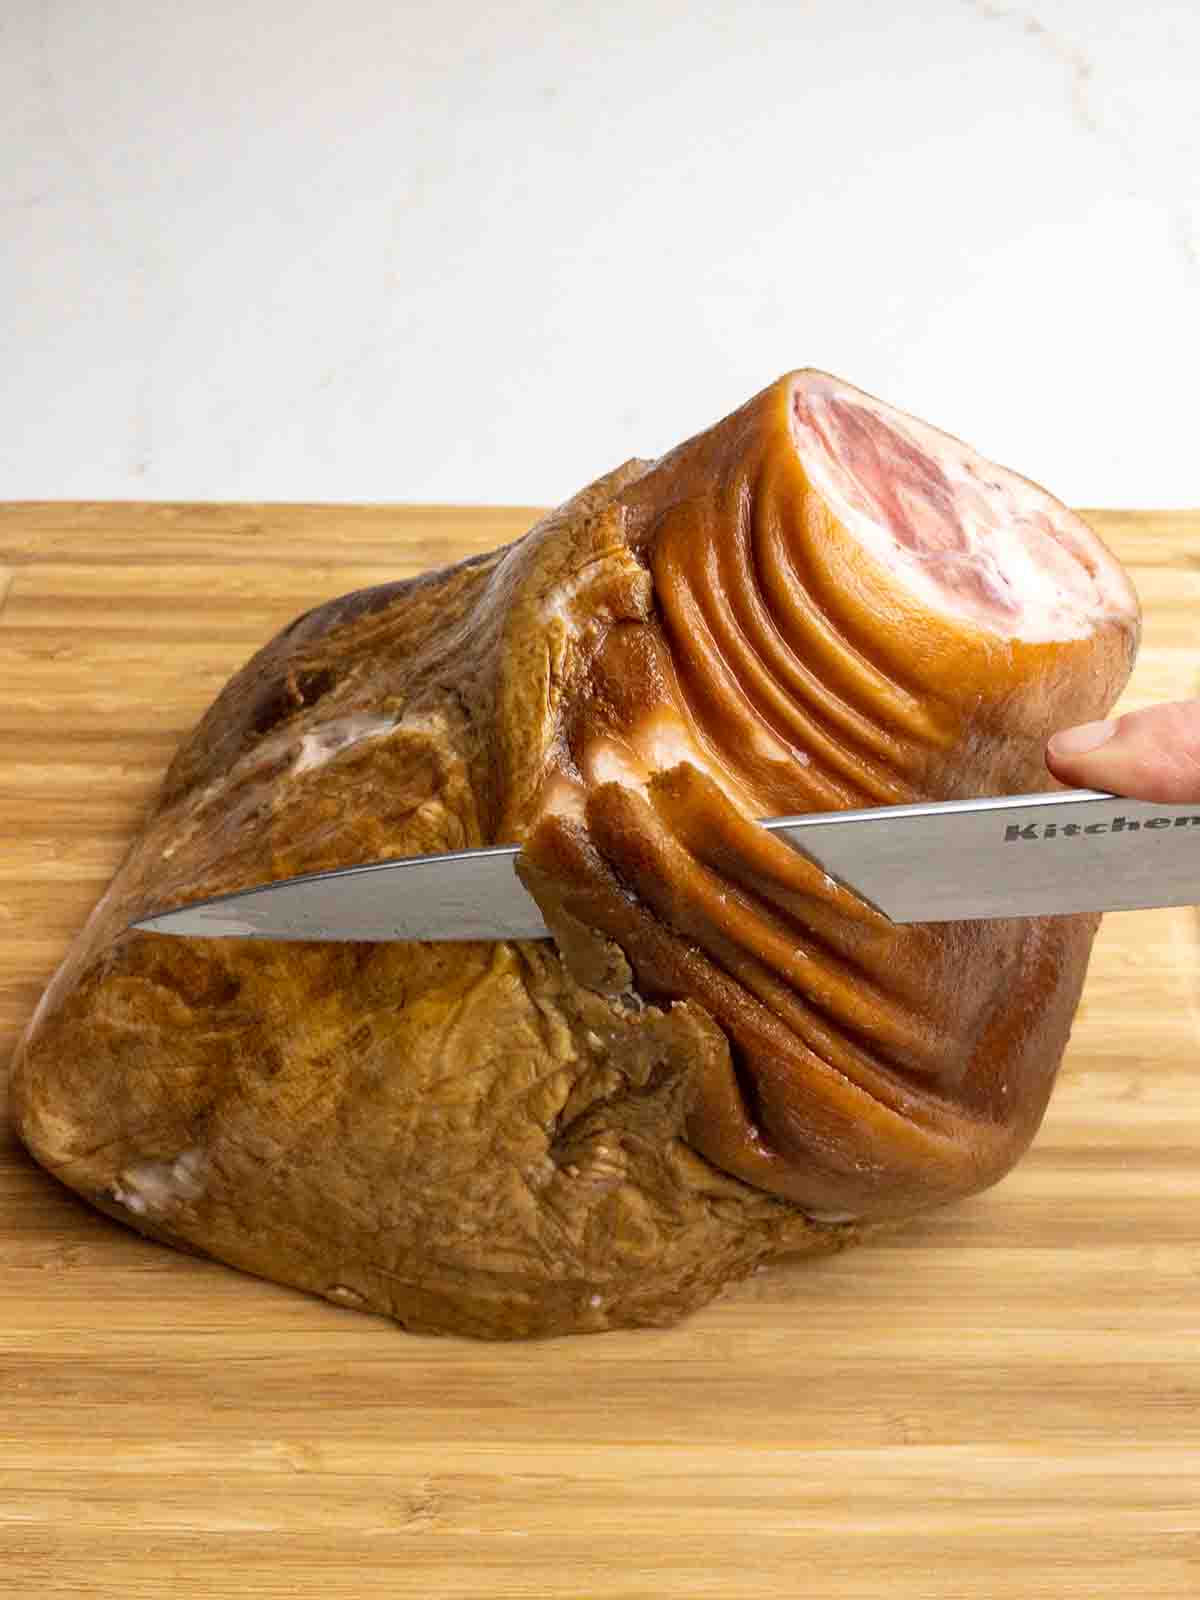 ham on a wooden cutting board with a knife cutting through the rind